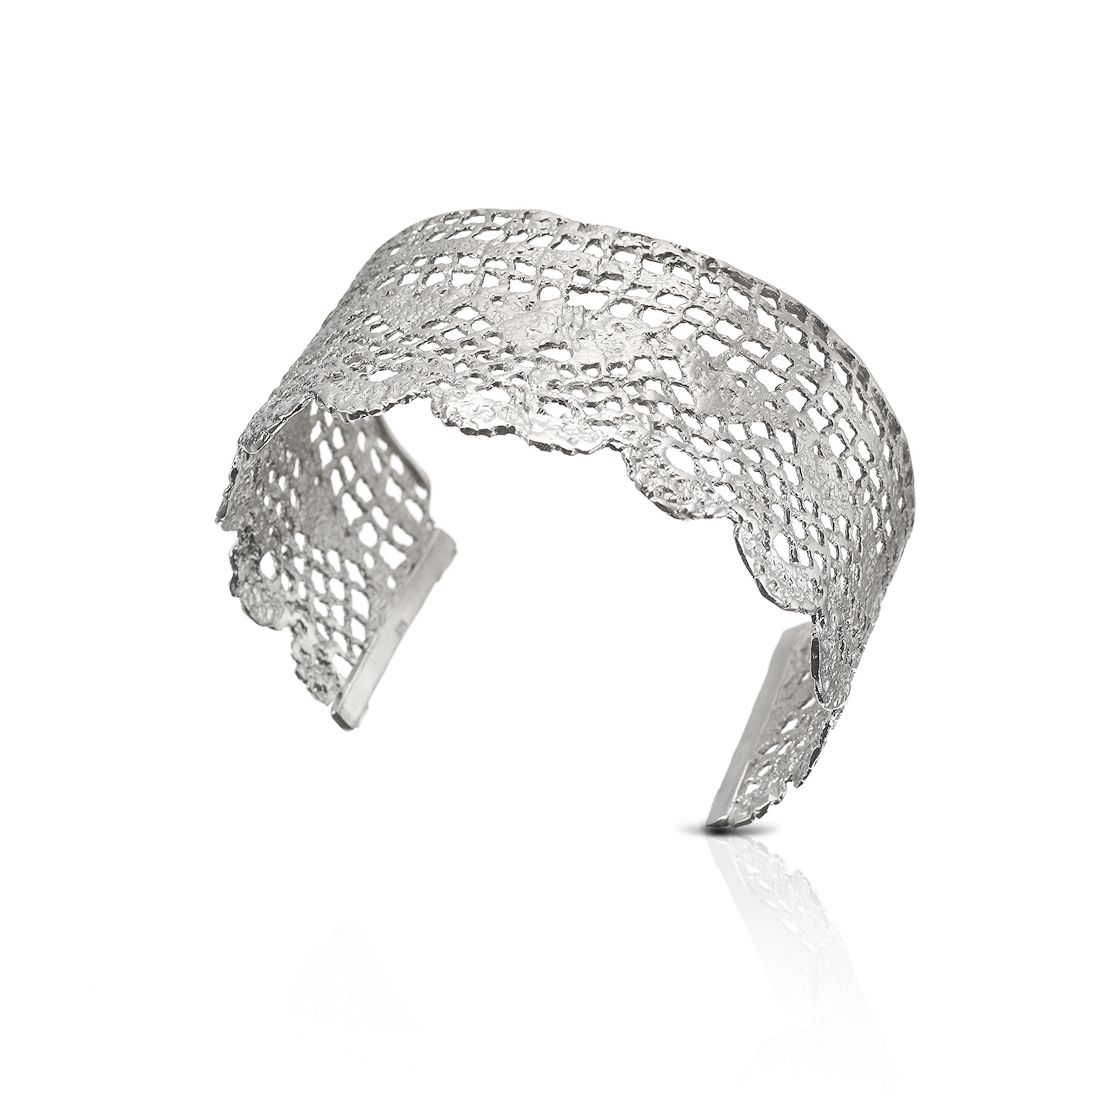 A charming silver lace wide-cuff bracelet is a delicate addition for your special day.